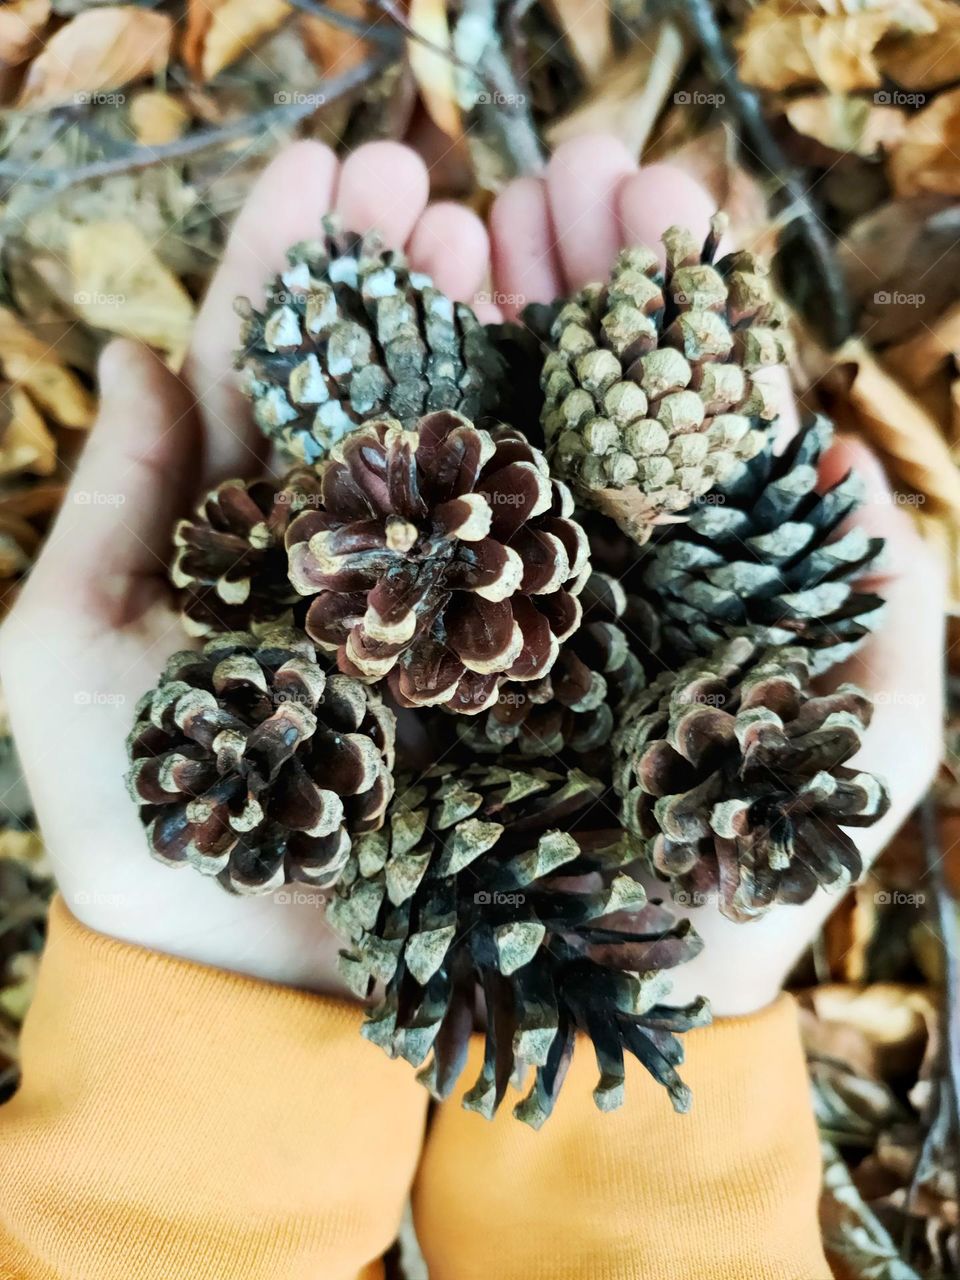 A boy is holding some pinecones in his hands